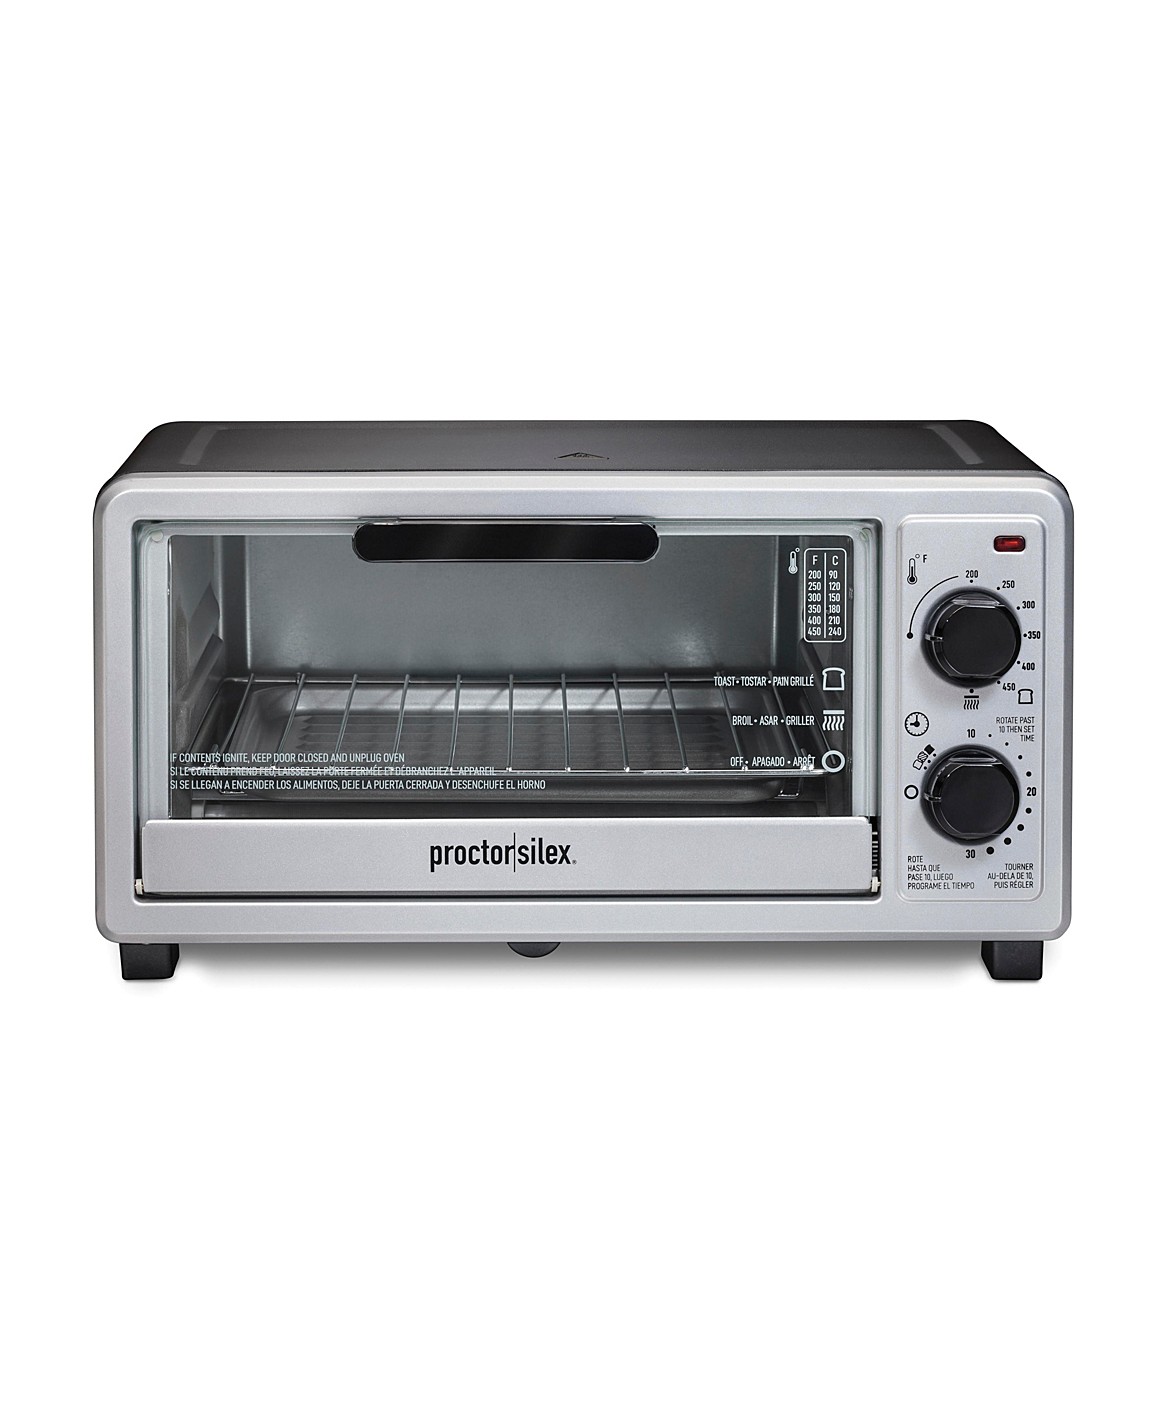 Proctor Silex Toaster Oven Broiler: Budget-Friendly Option for Basic Cooking Needs